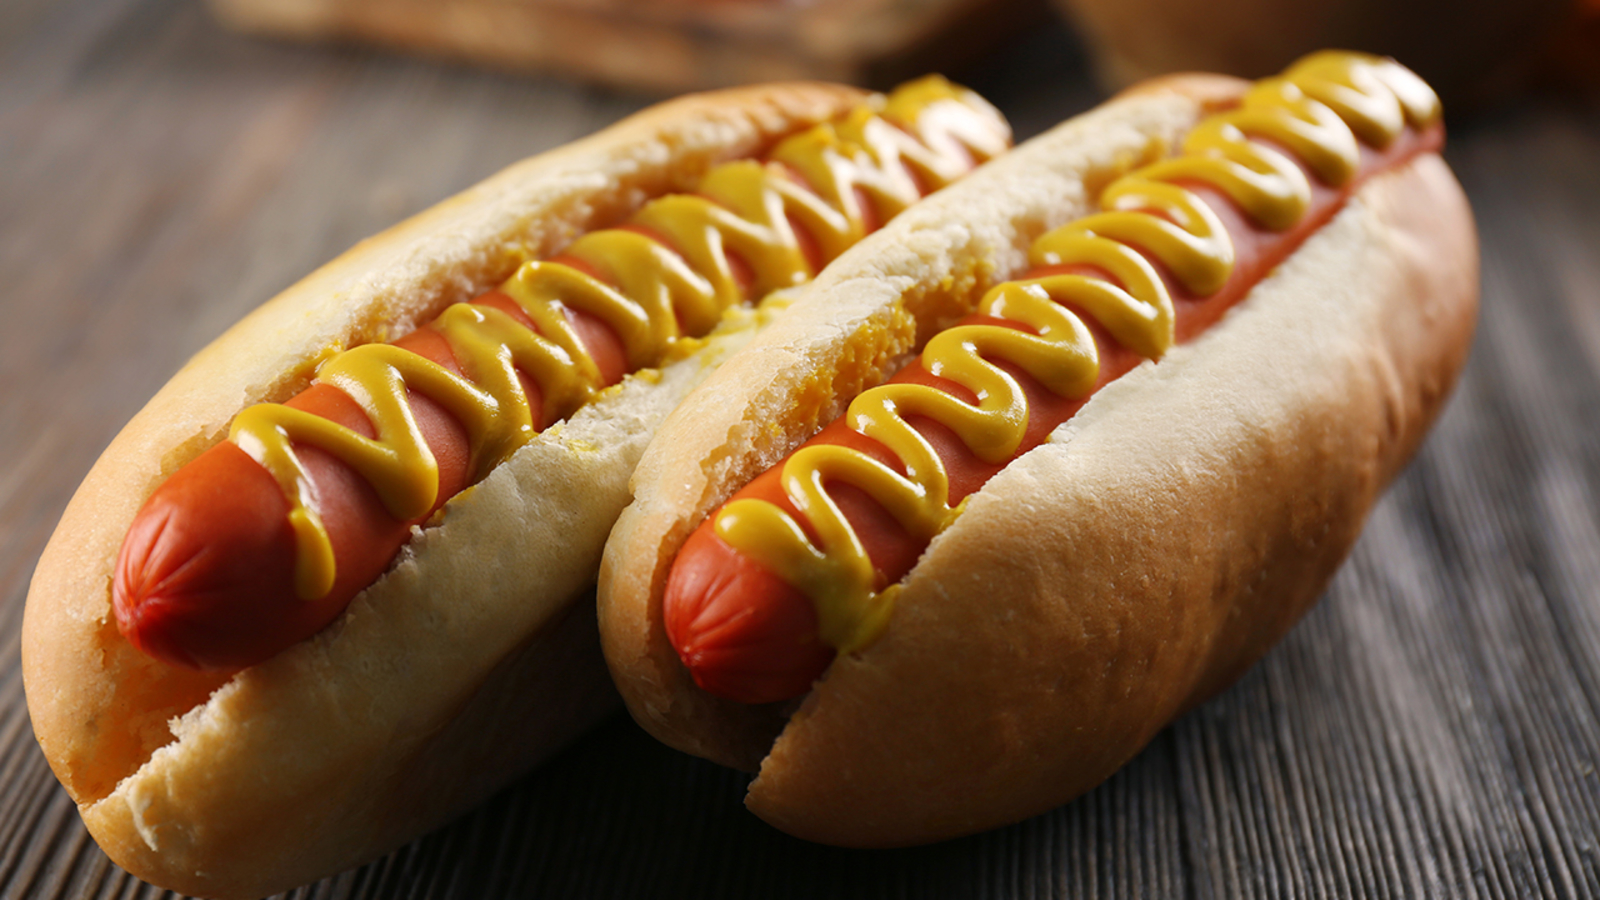 CONSUMER CATCH UP: National Hot Dog Day Freebies, 'Stopping Bad